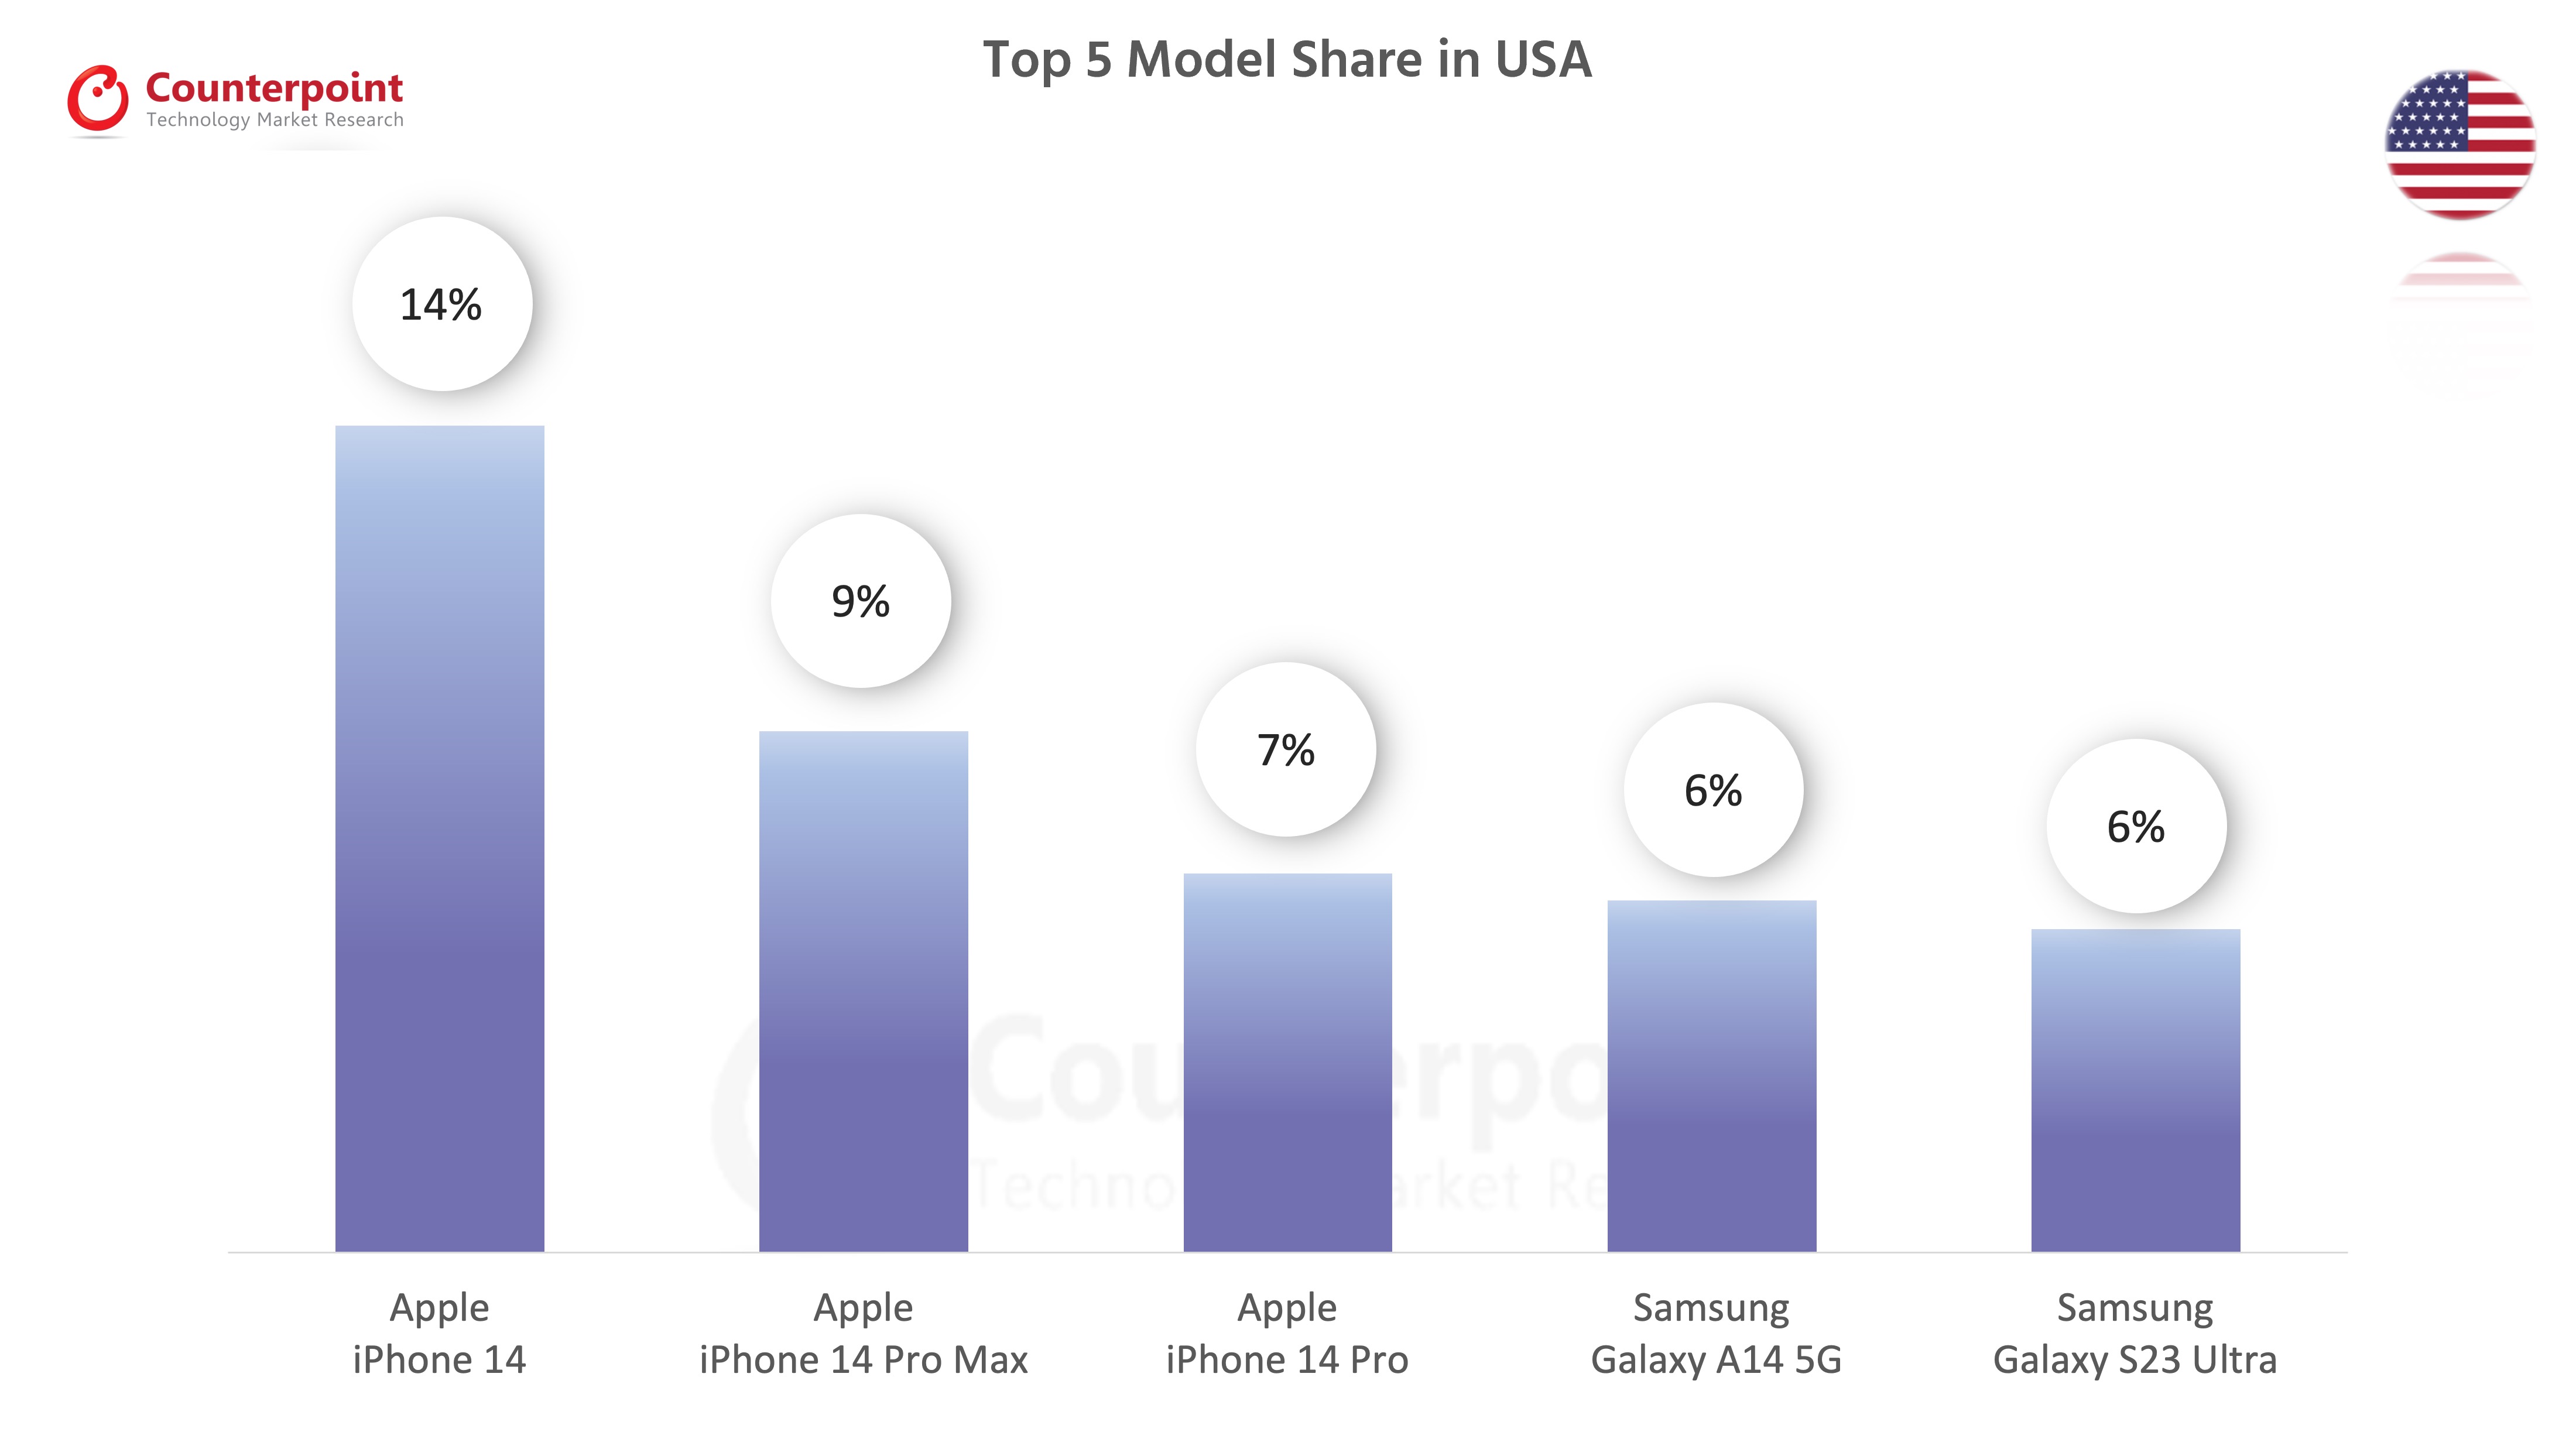 Top 5 Model Share in USA